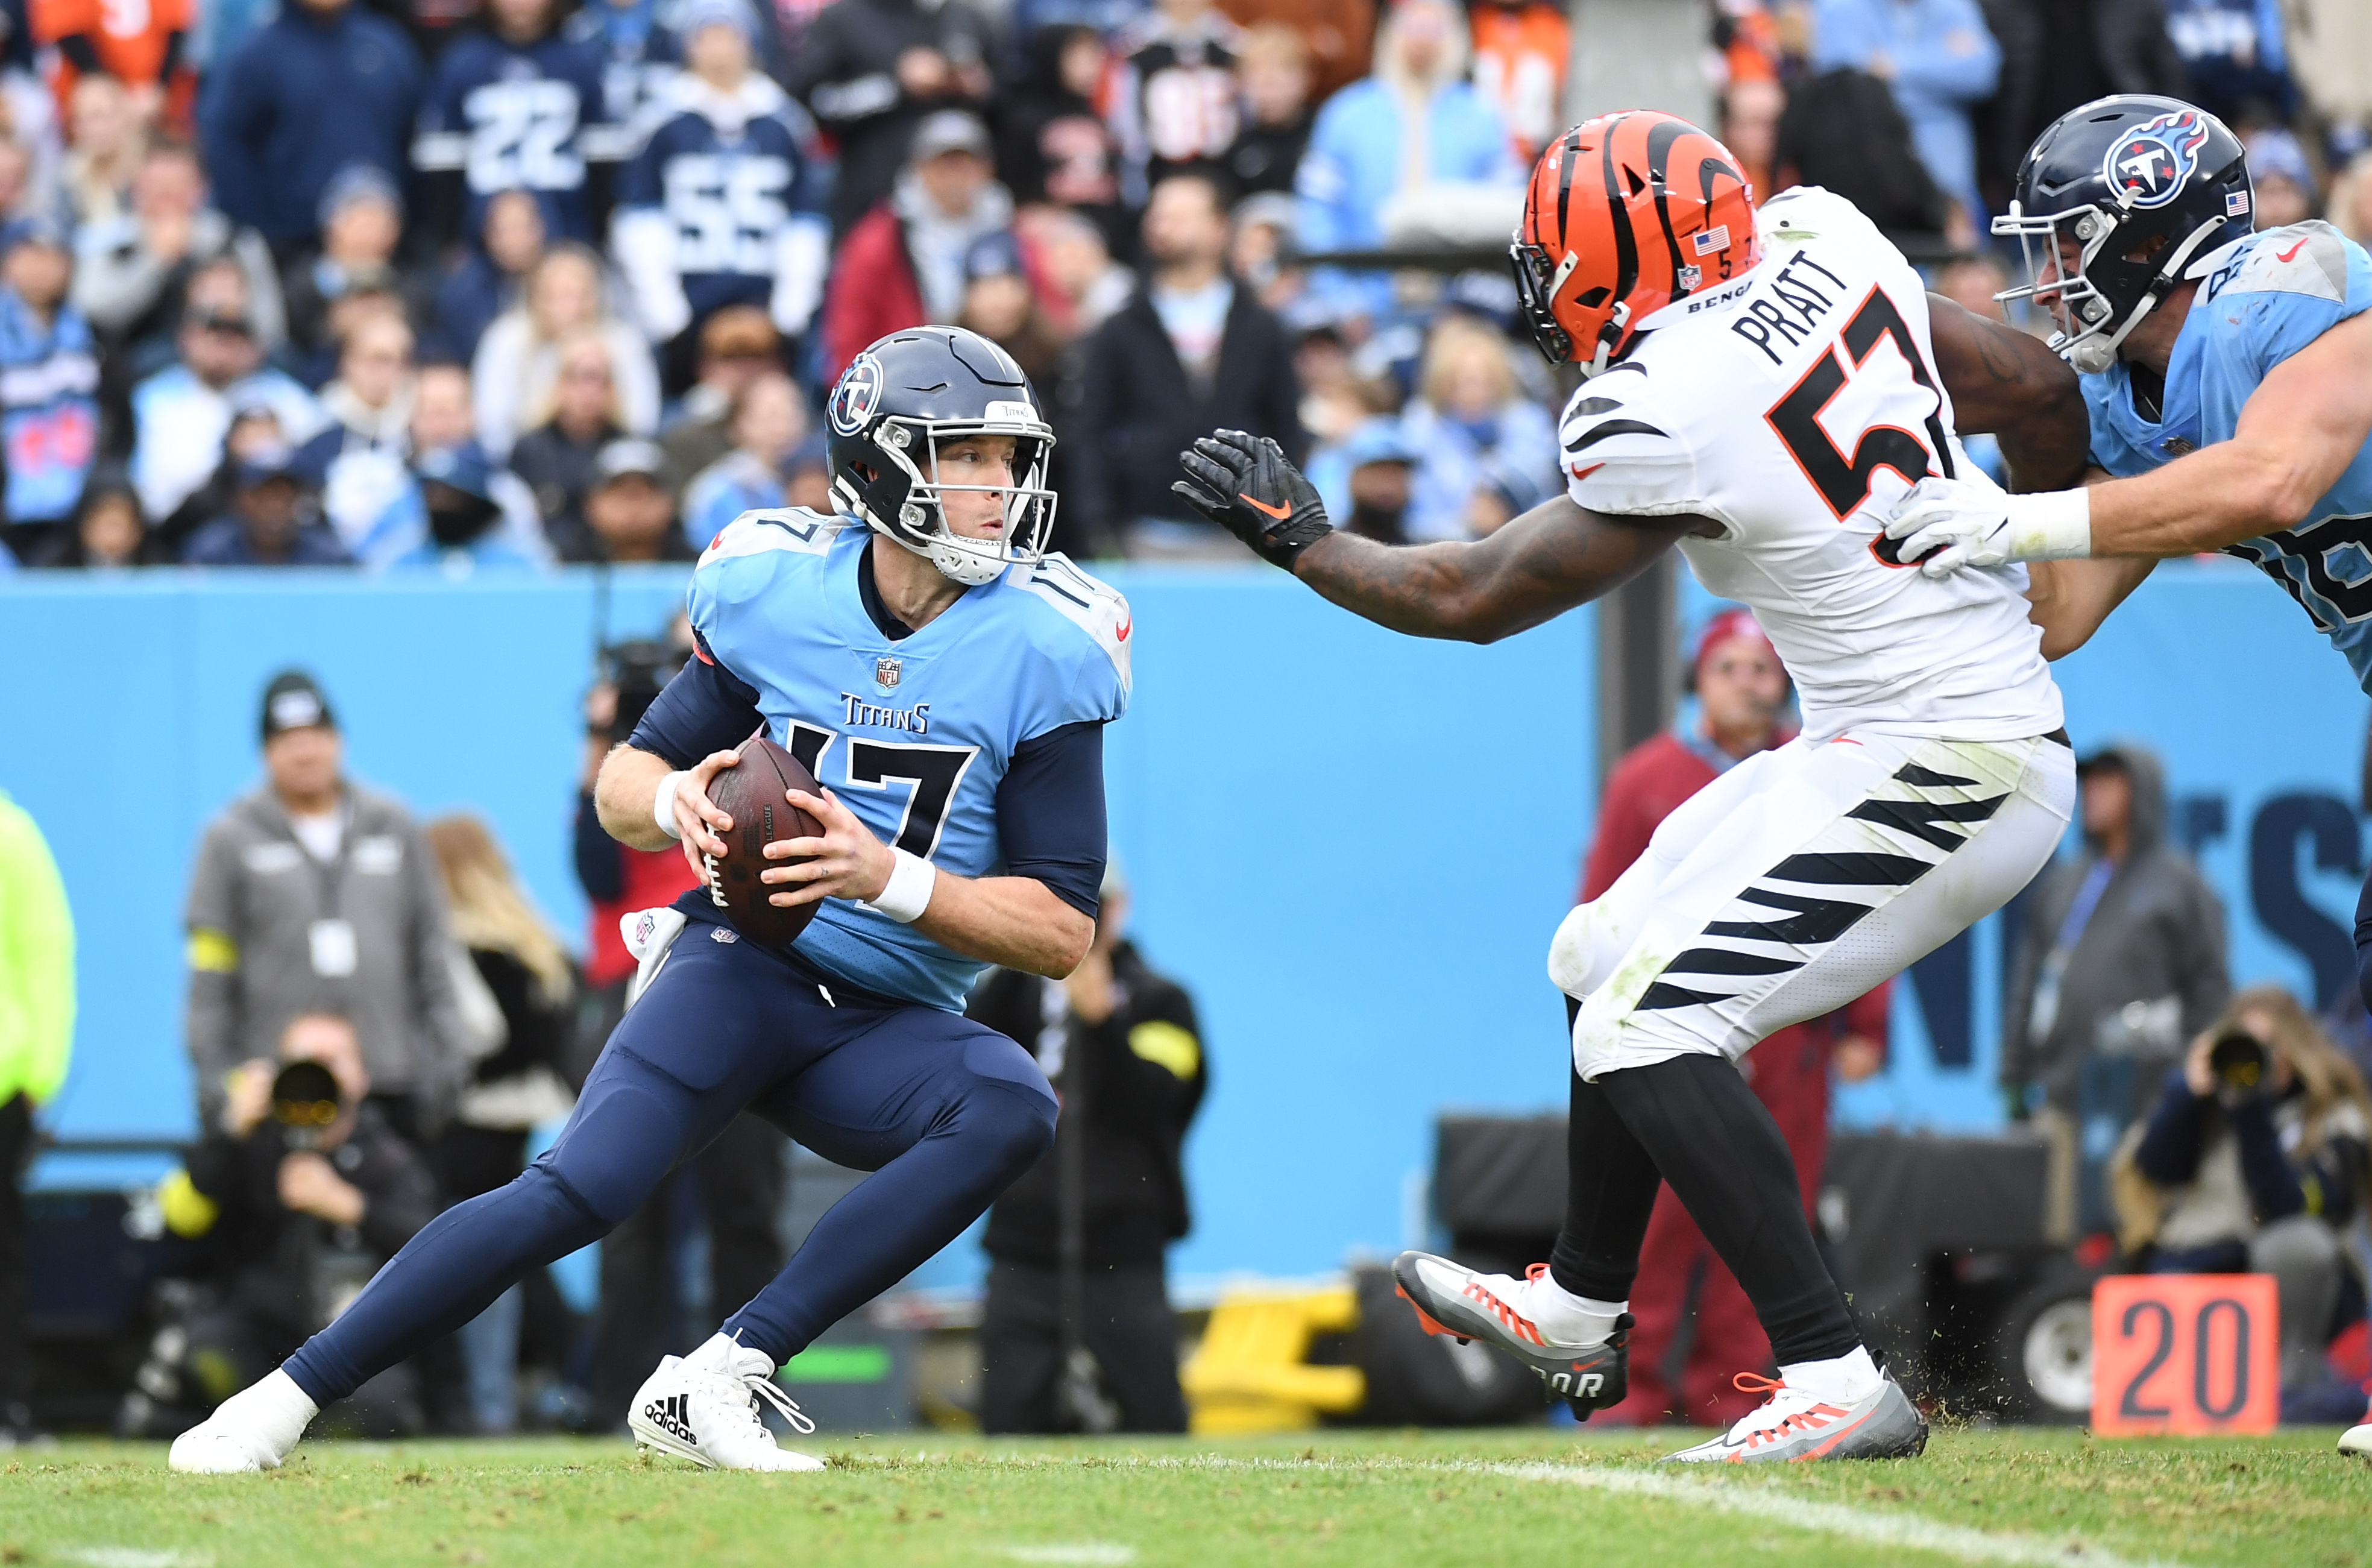 Bengals vs. Titans: How to Watch the Week 4 NFL Game Online Today